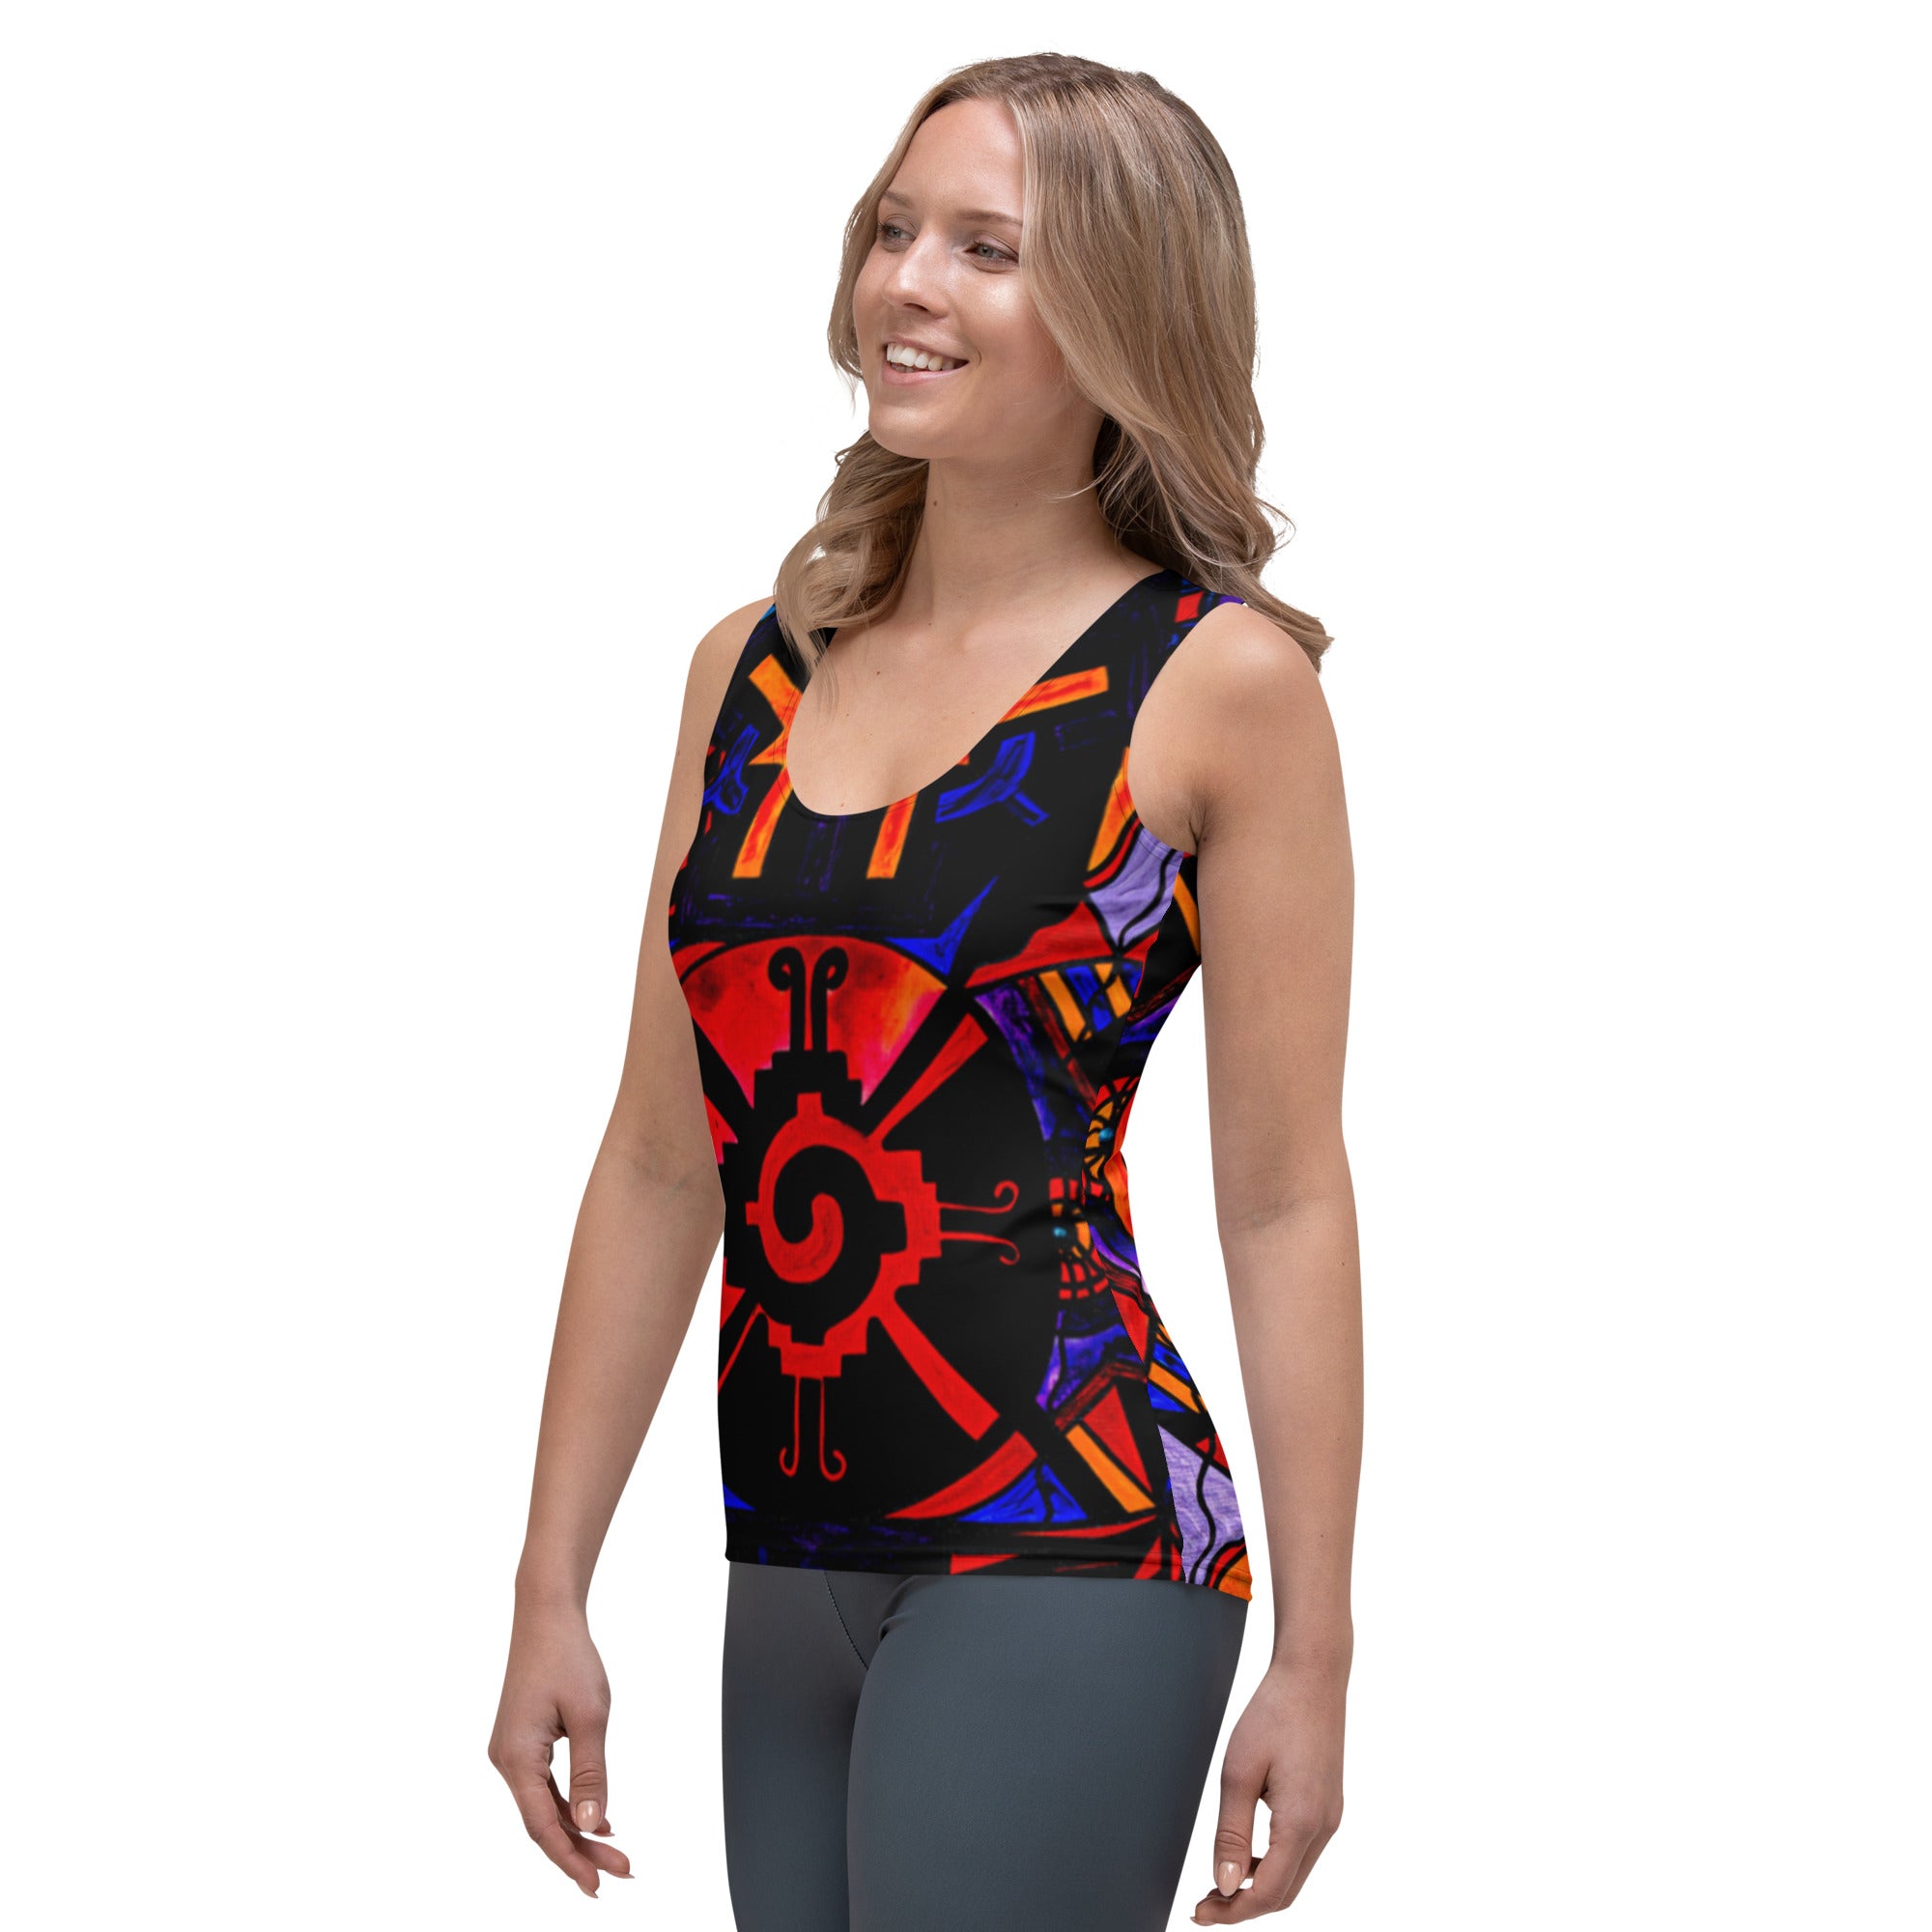 shop-our-official-alnilam-strength-grid-sublimation-cut-sew-tank-top-online-hot-sale_2.jpg